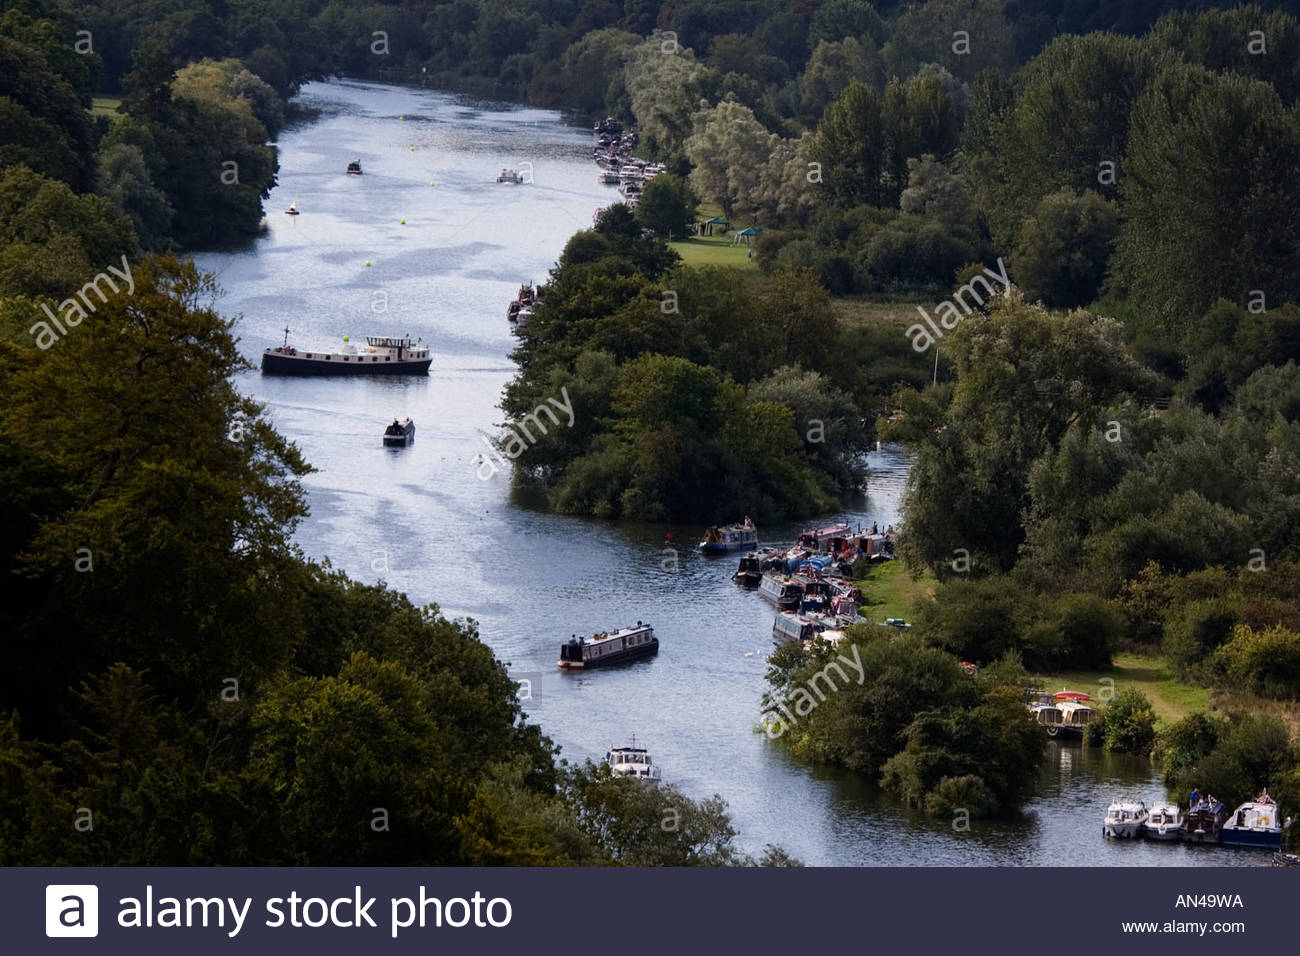 Goring Gap High Resolution Stock Photography and Images - Alamy